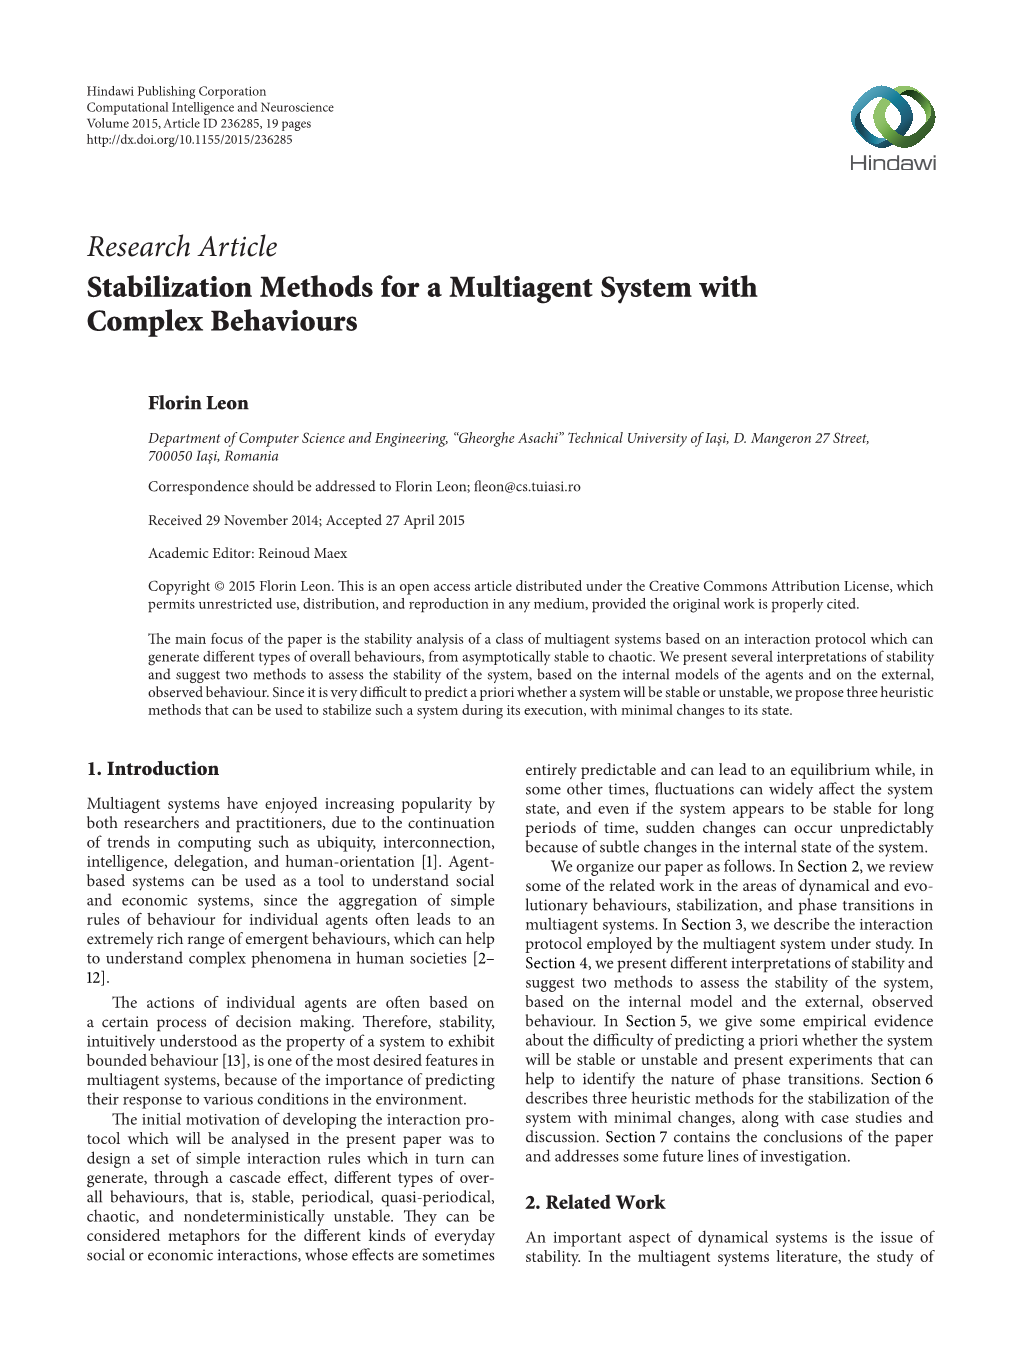 Stabilization Methods for a Multiagent System with Complex Behaviours